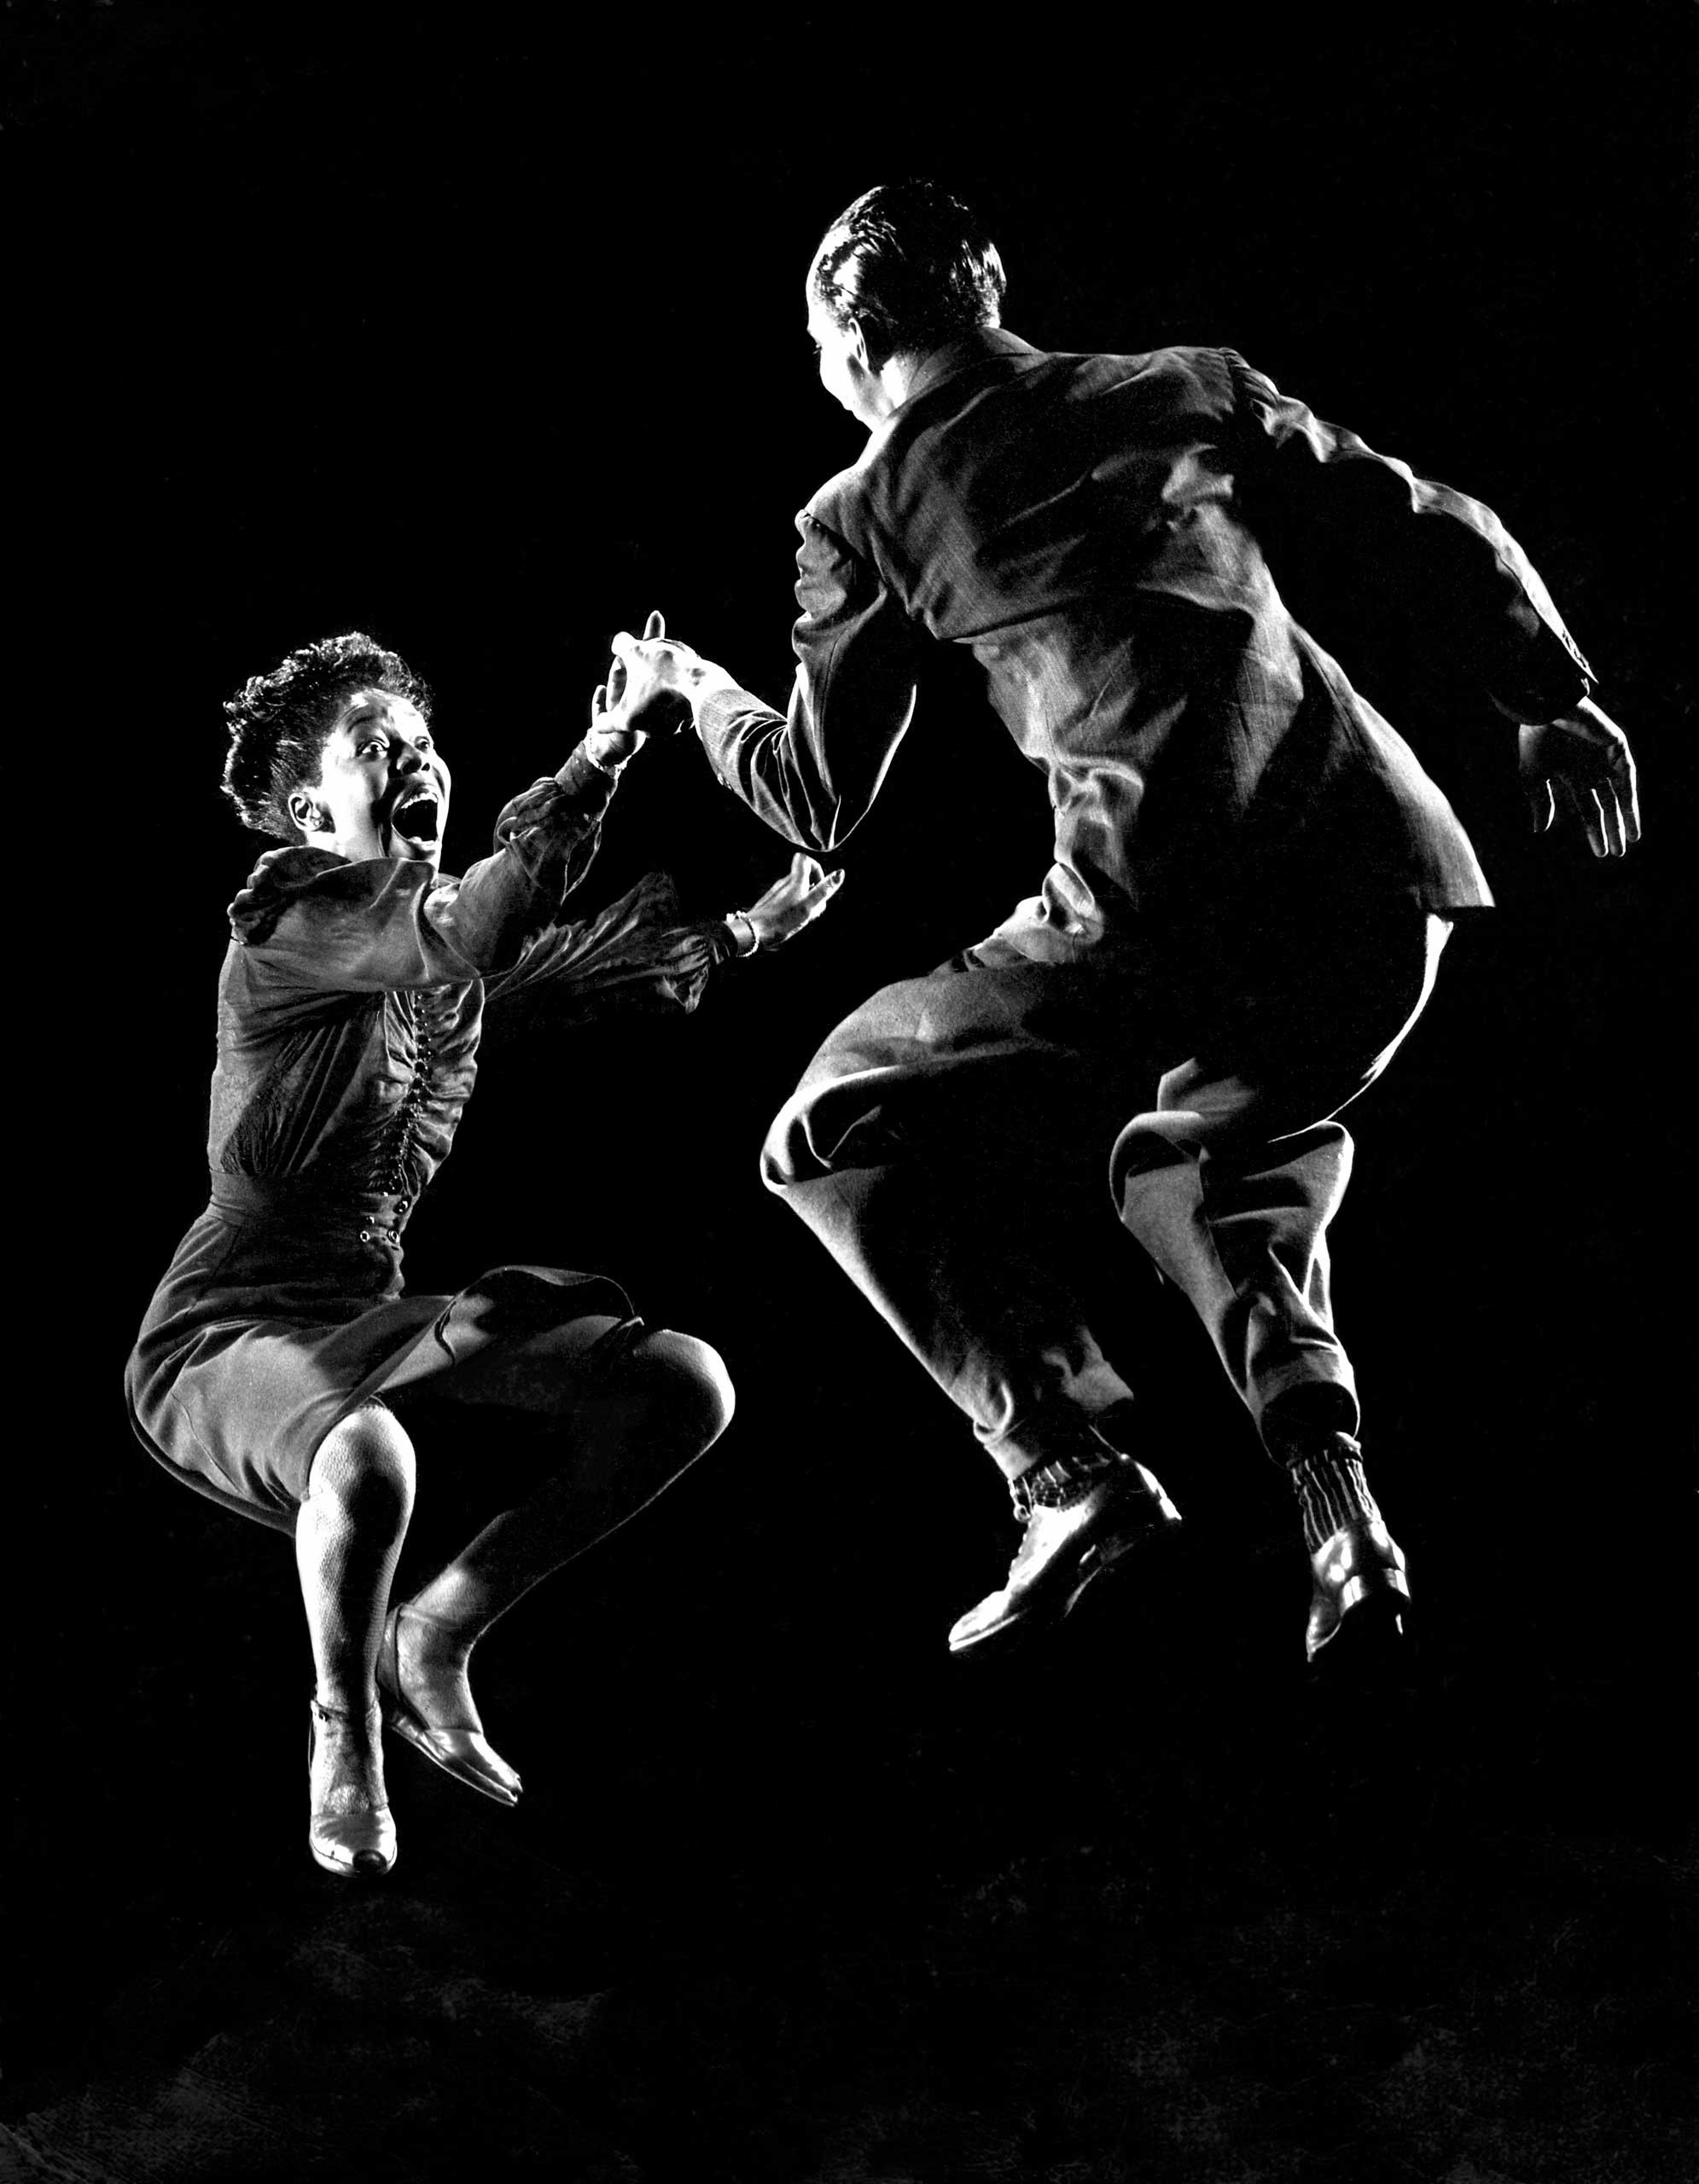 1943 | Professional dancers Willa Mae Ricker and Leon James demonstrate how the Lindy Hop is meant to be danced. Originally published in the August 23, 1943, issue of LIFE.